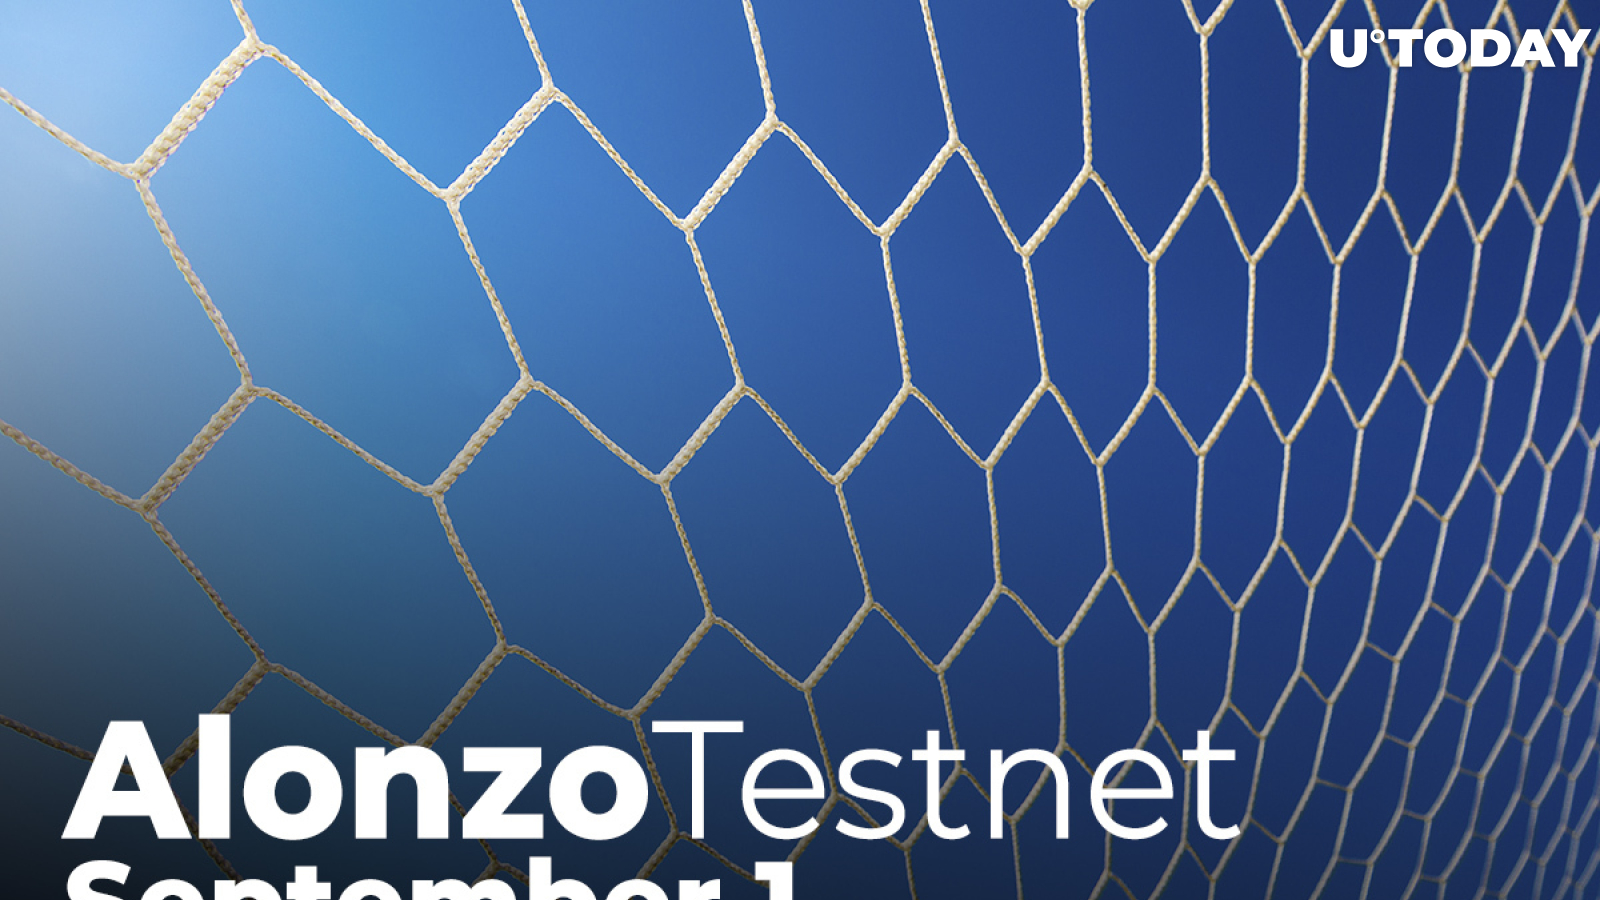 Cardano’s Head of Delivery Ready to Submit Proposal for Upcoming Launch of Final Alonzo Testnet on September 1 